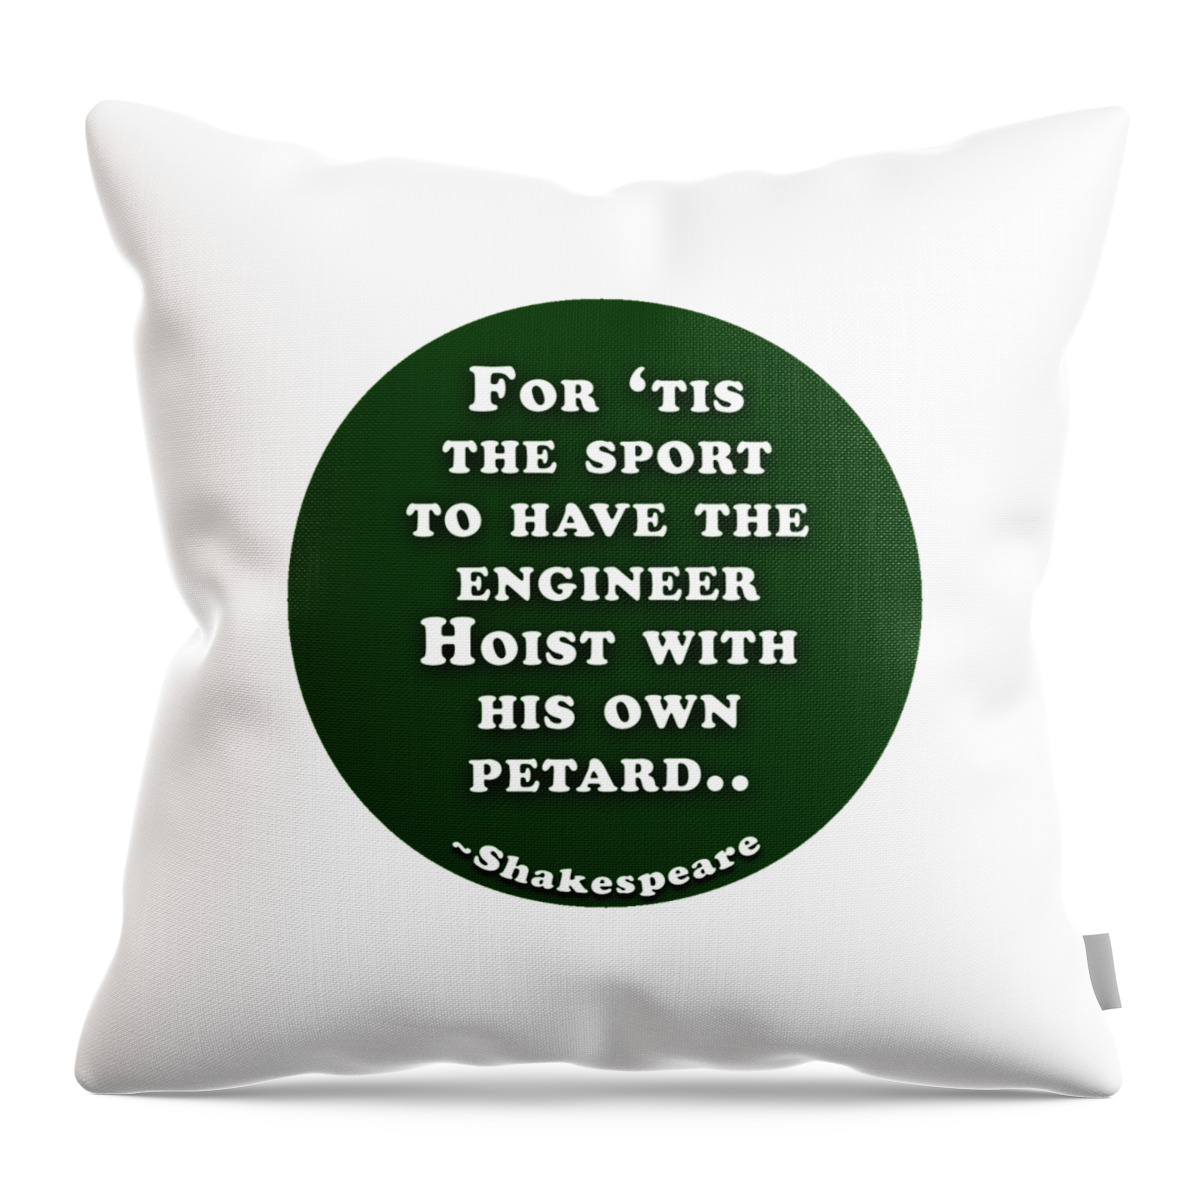 For Throw Pillow featuring the digital art For 'tis the sport to have the engineer #shakespeare #shakespearequote by TintoDesigns